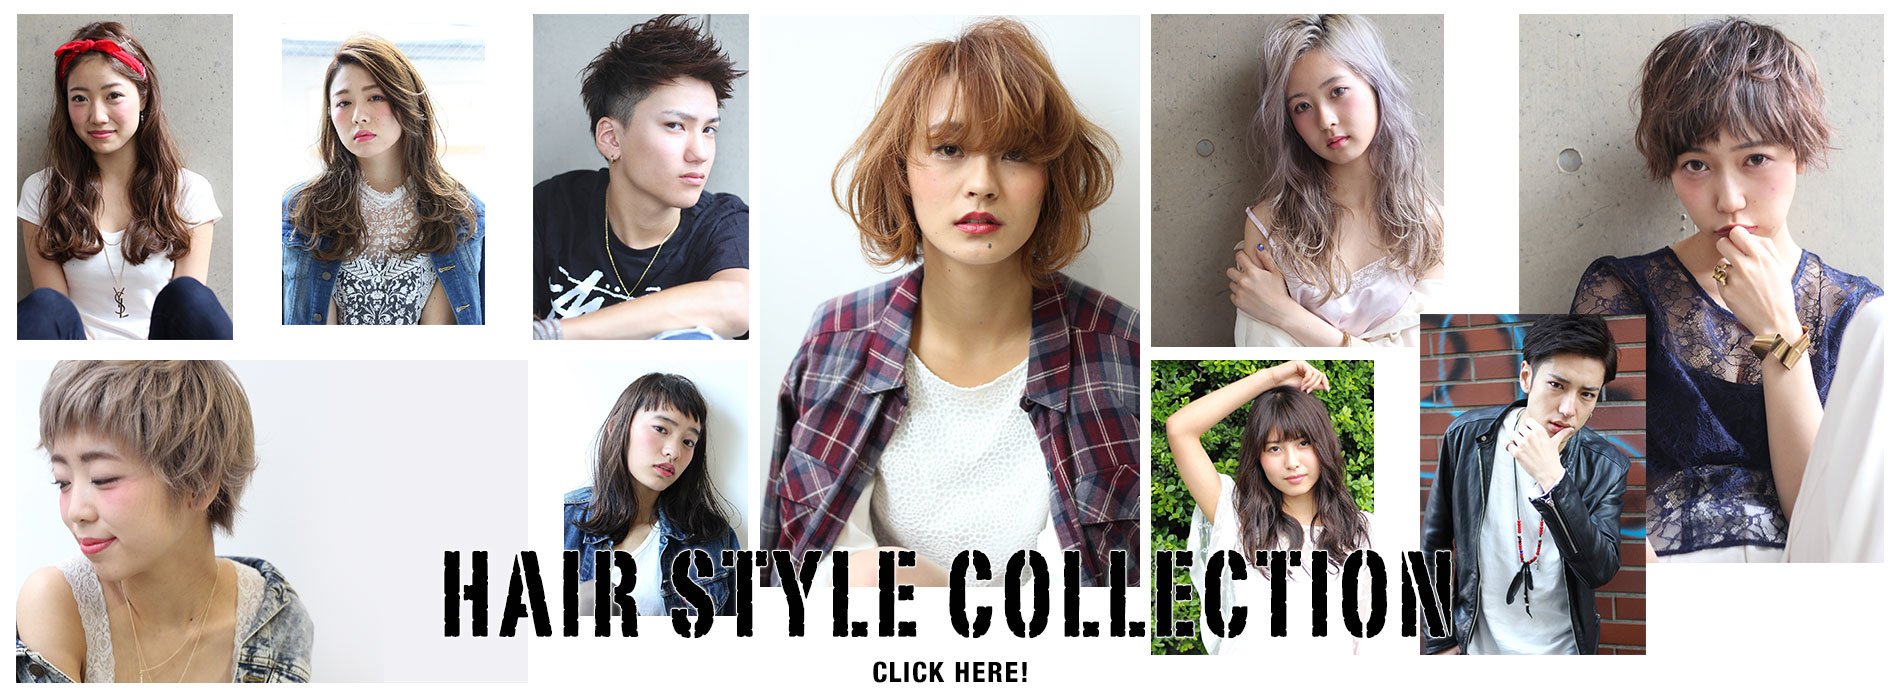 HAIR STYLE COLLECTION